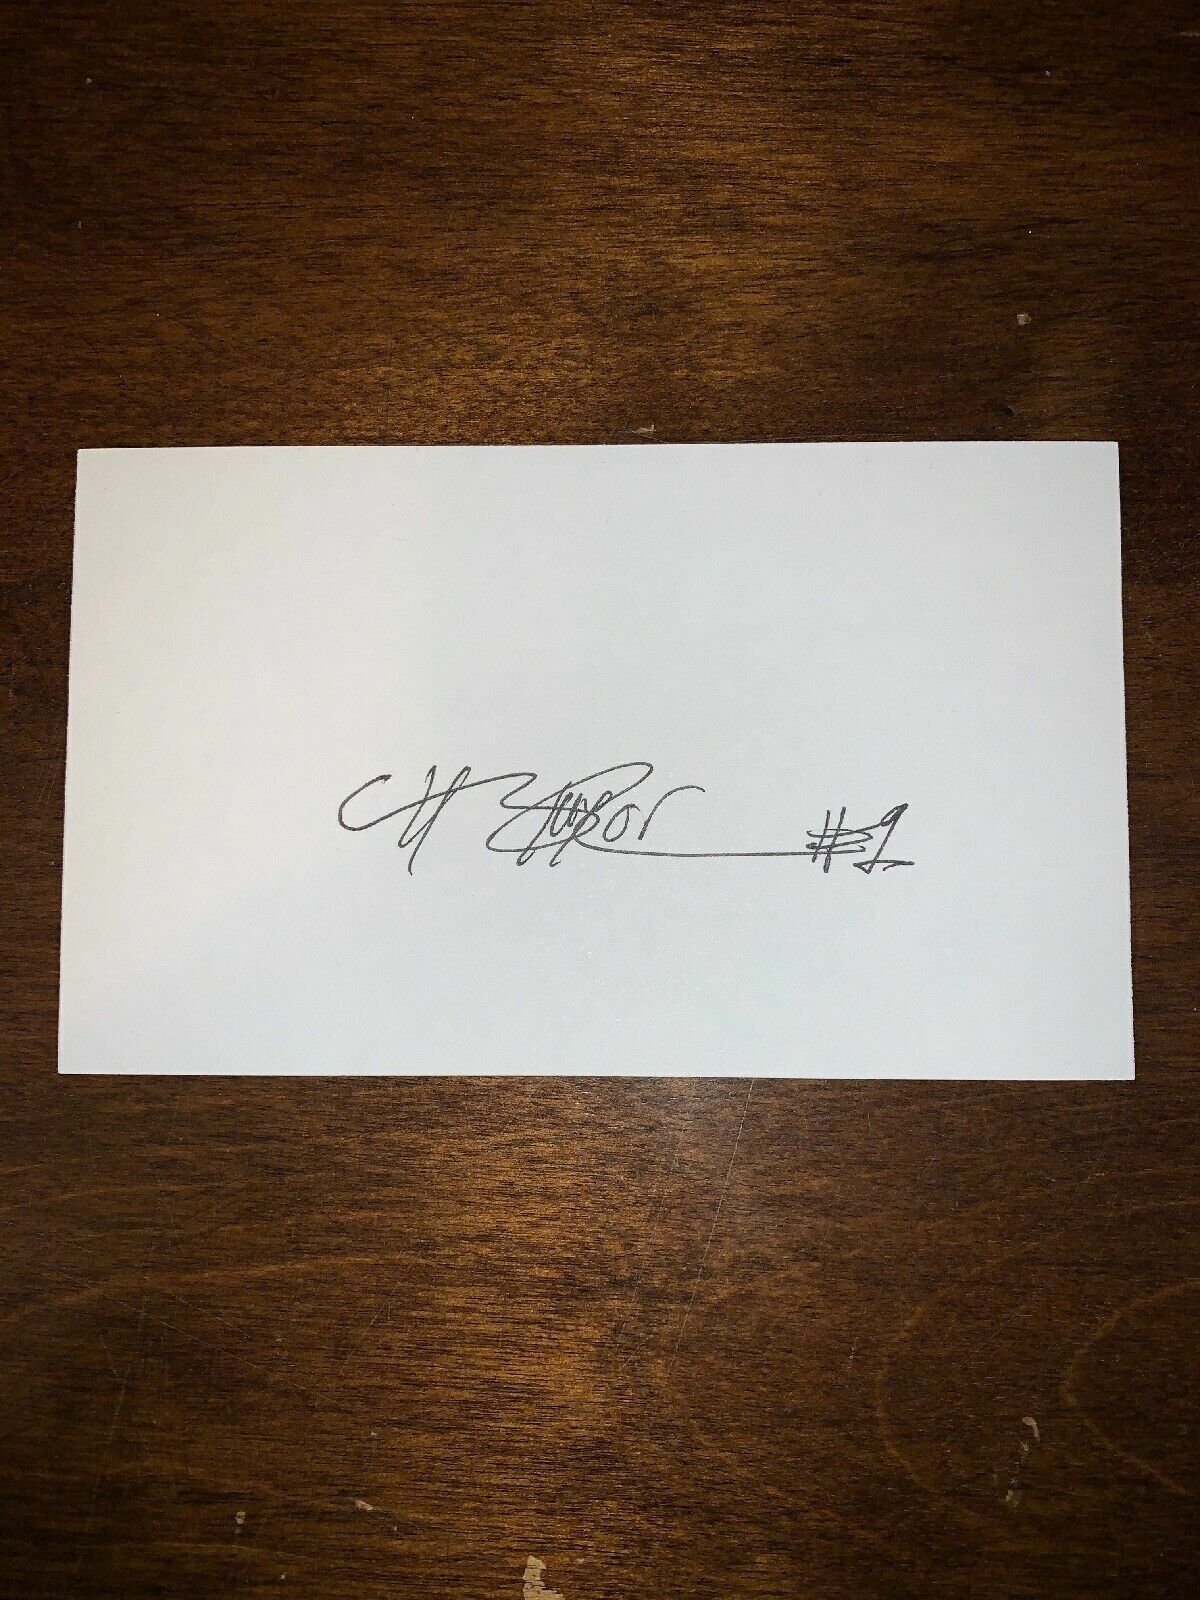 CHRIS TAYLOR - BASKETBALL - AUTOGRAPH SIGNED - INDEX CARD -AUTHENTIC -C2240